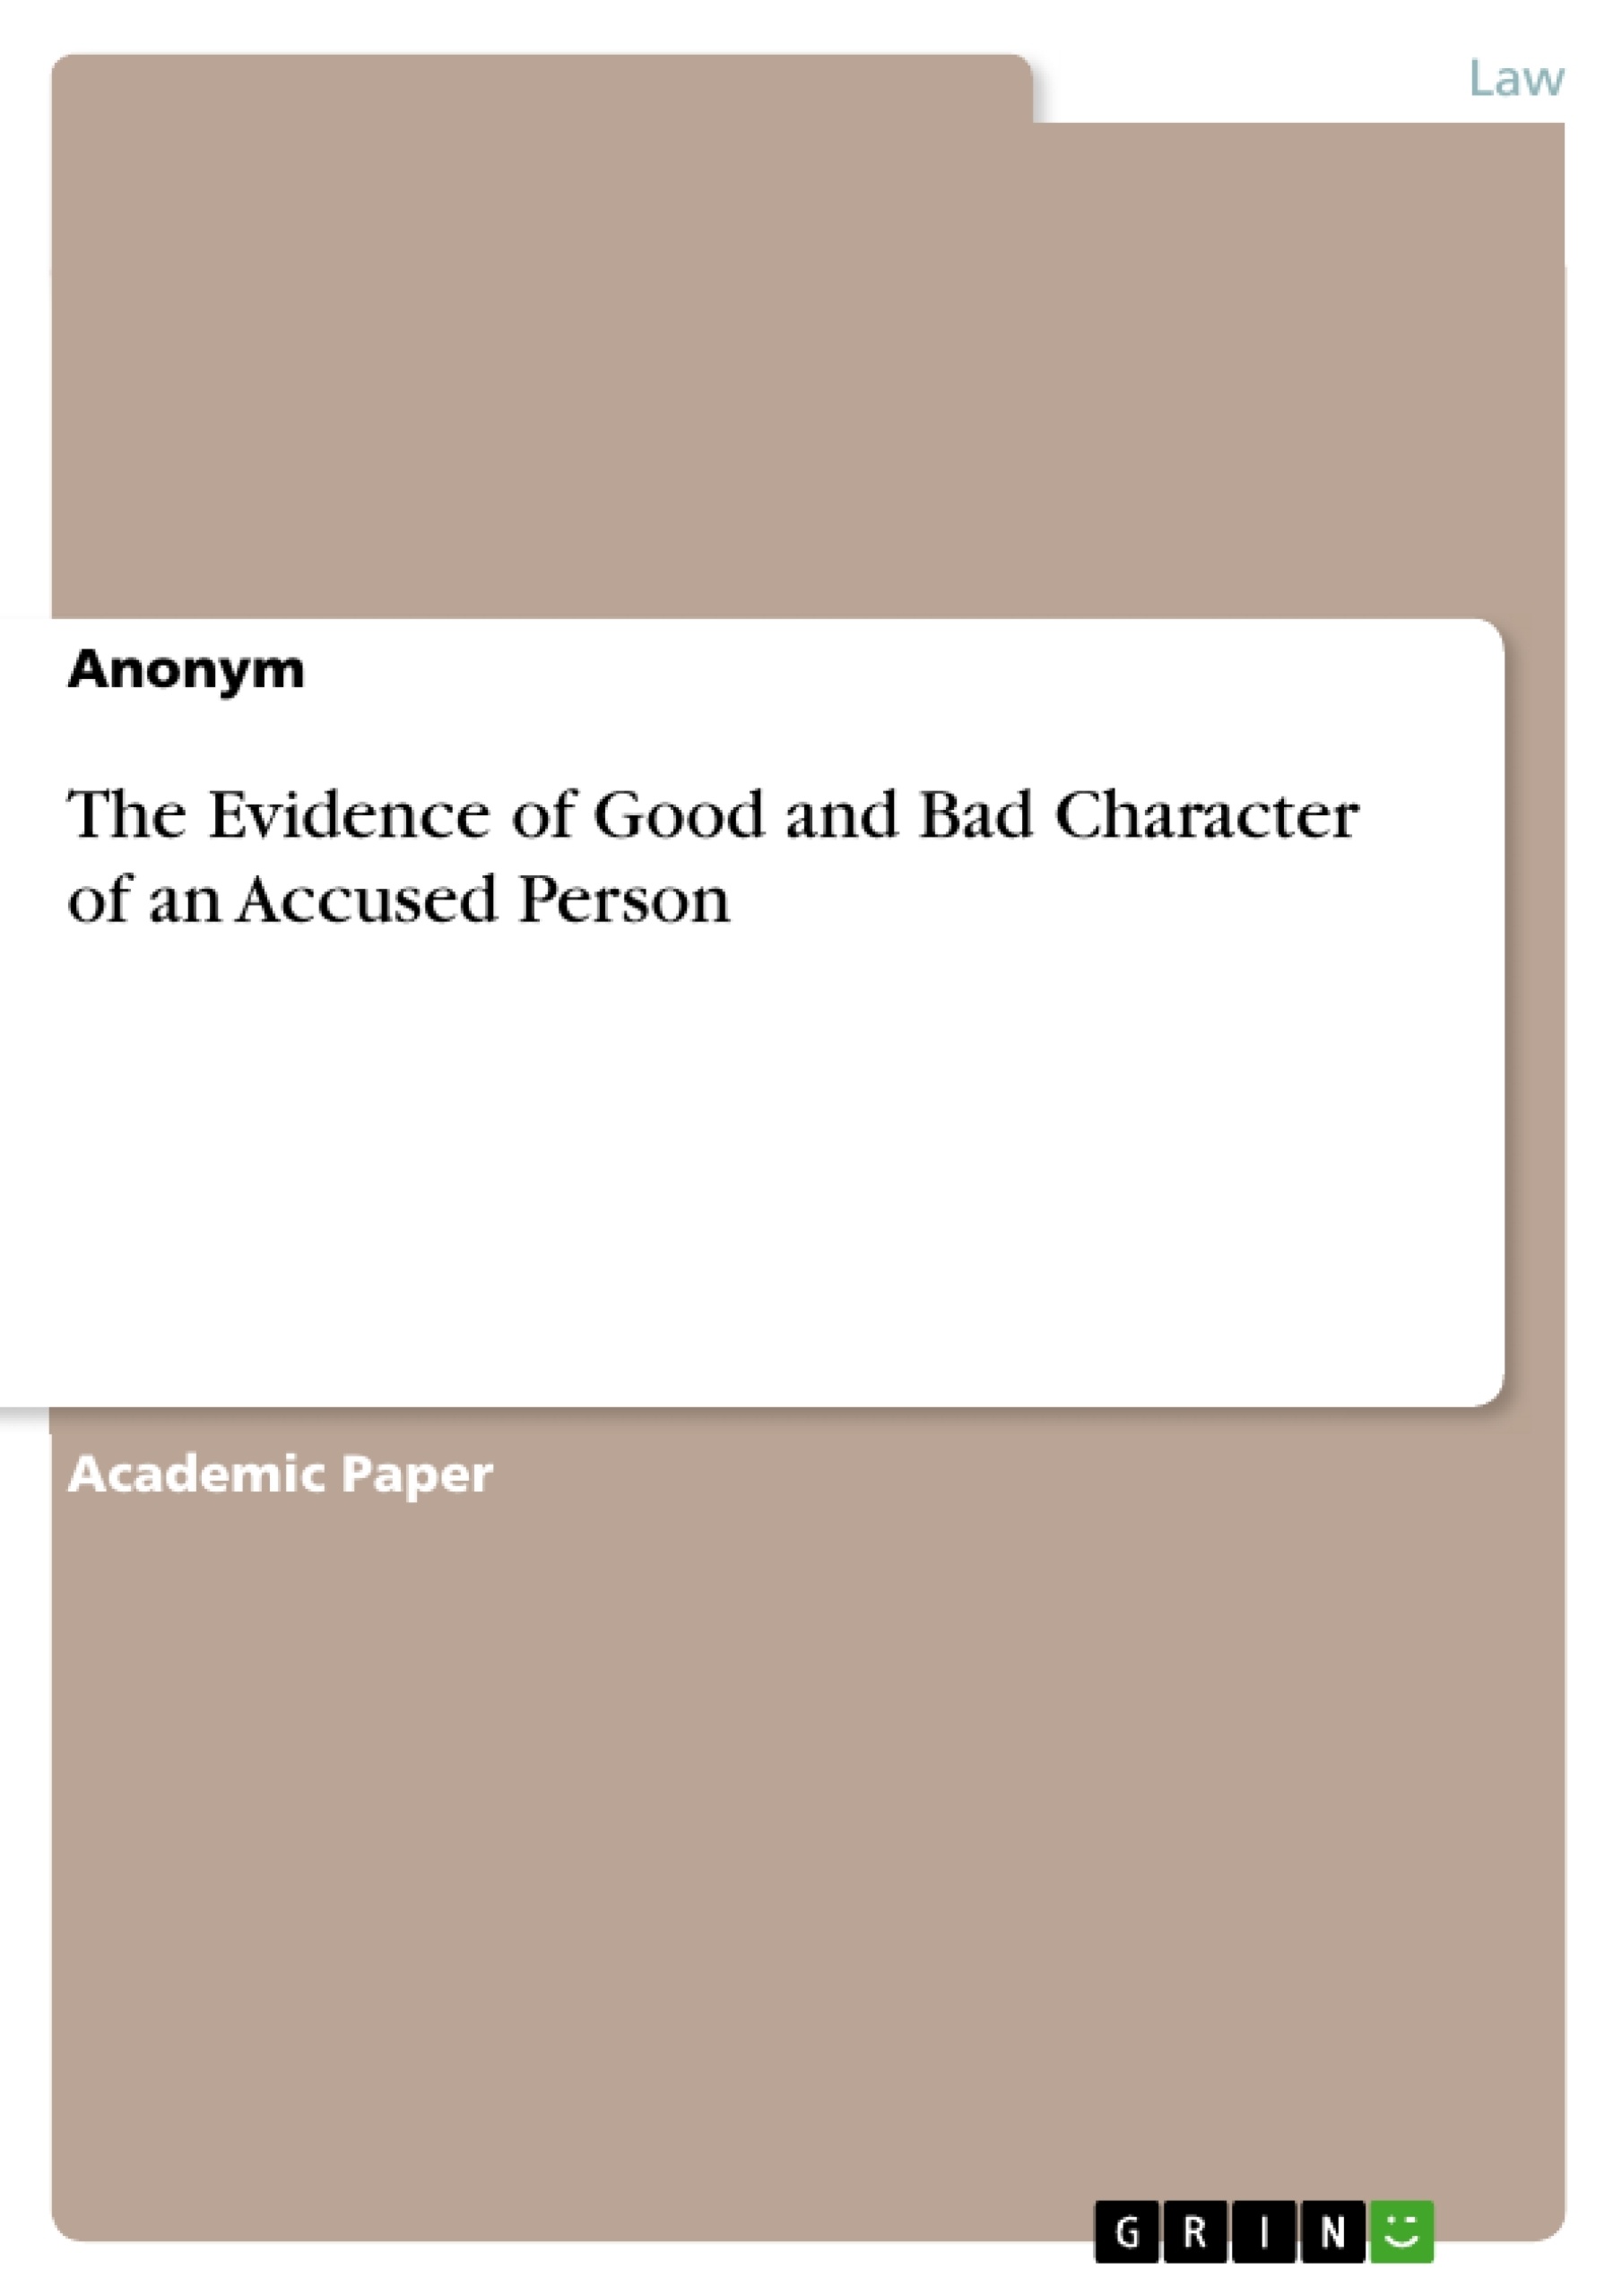 Title: The Evidence of Good and Bad Character of an Accused Person